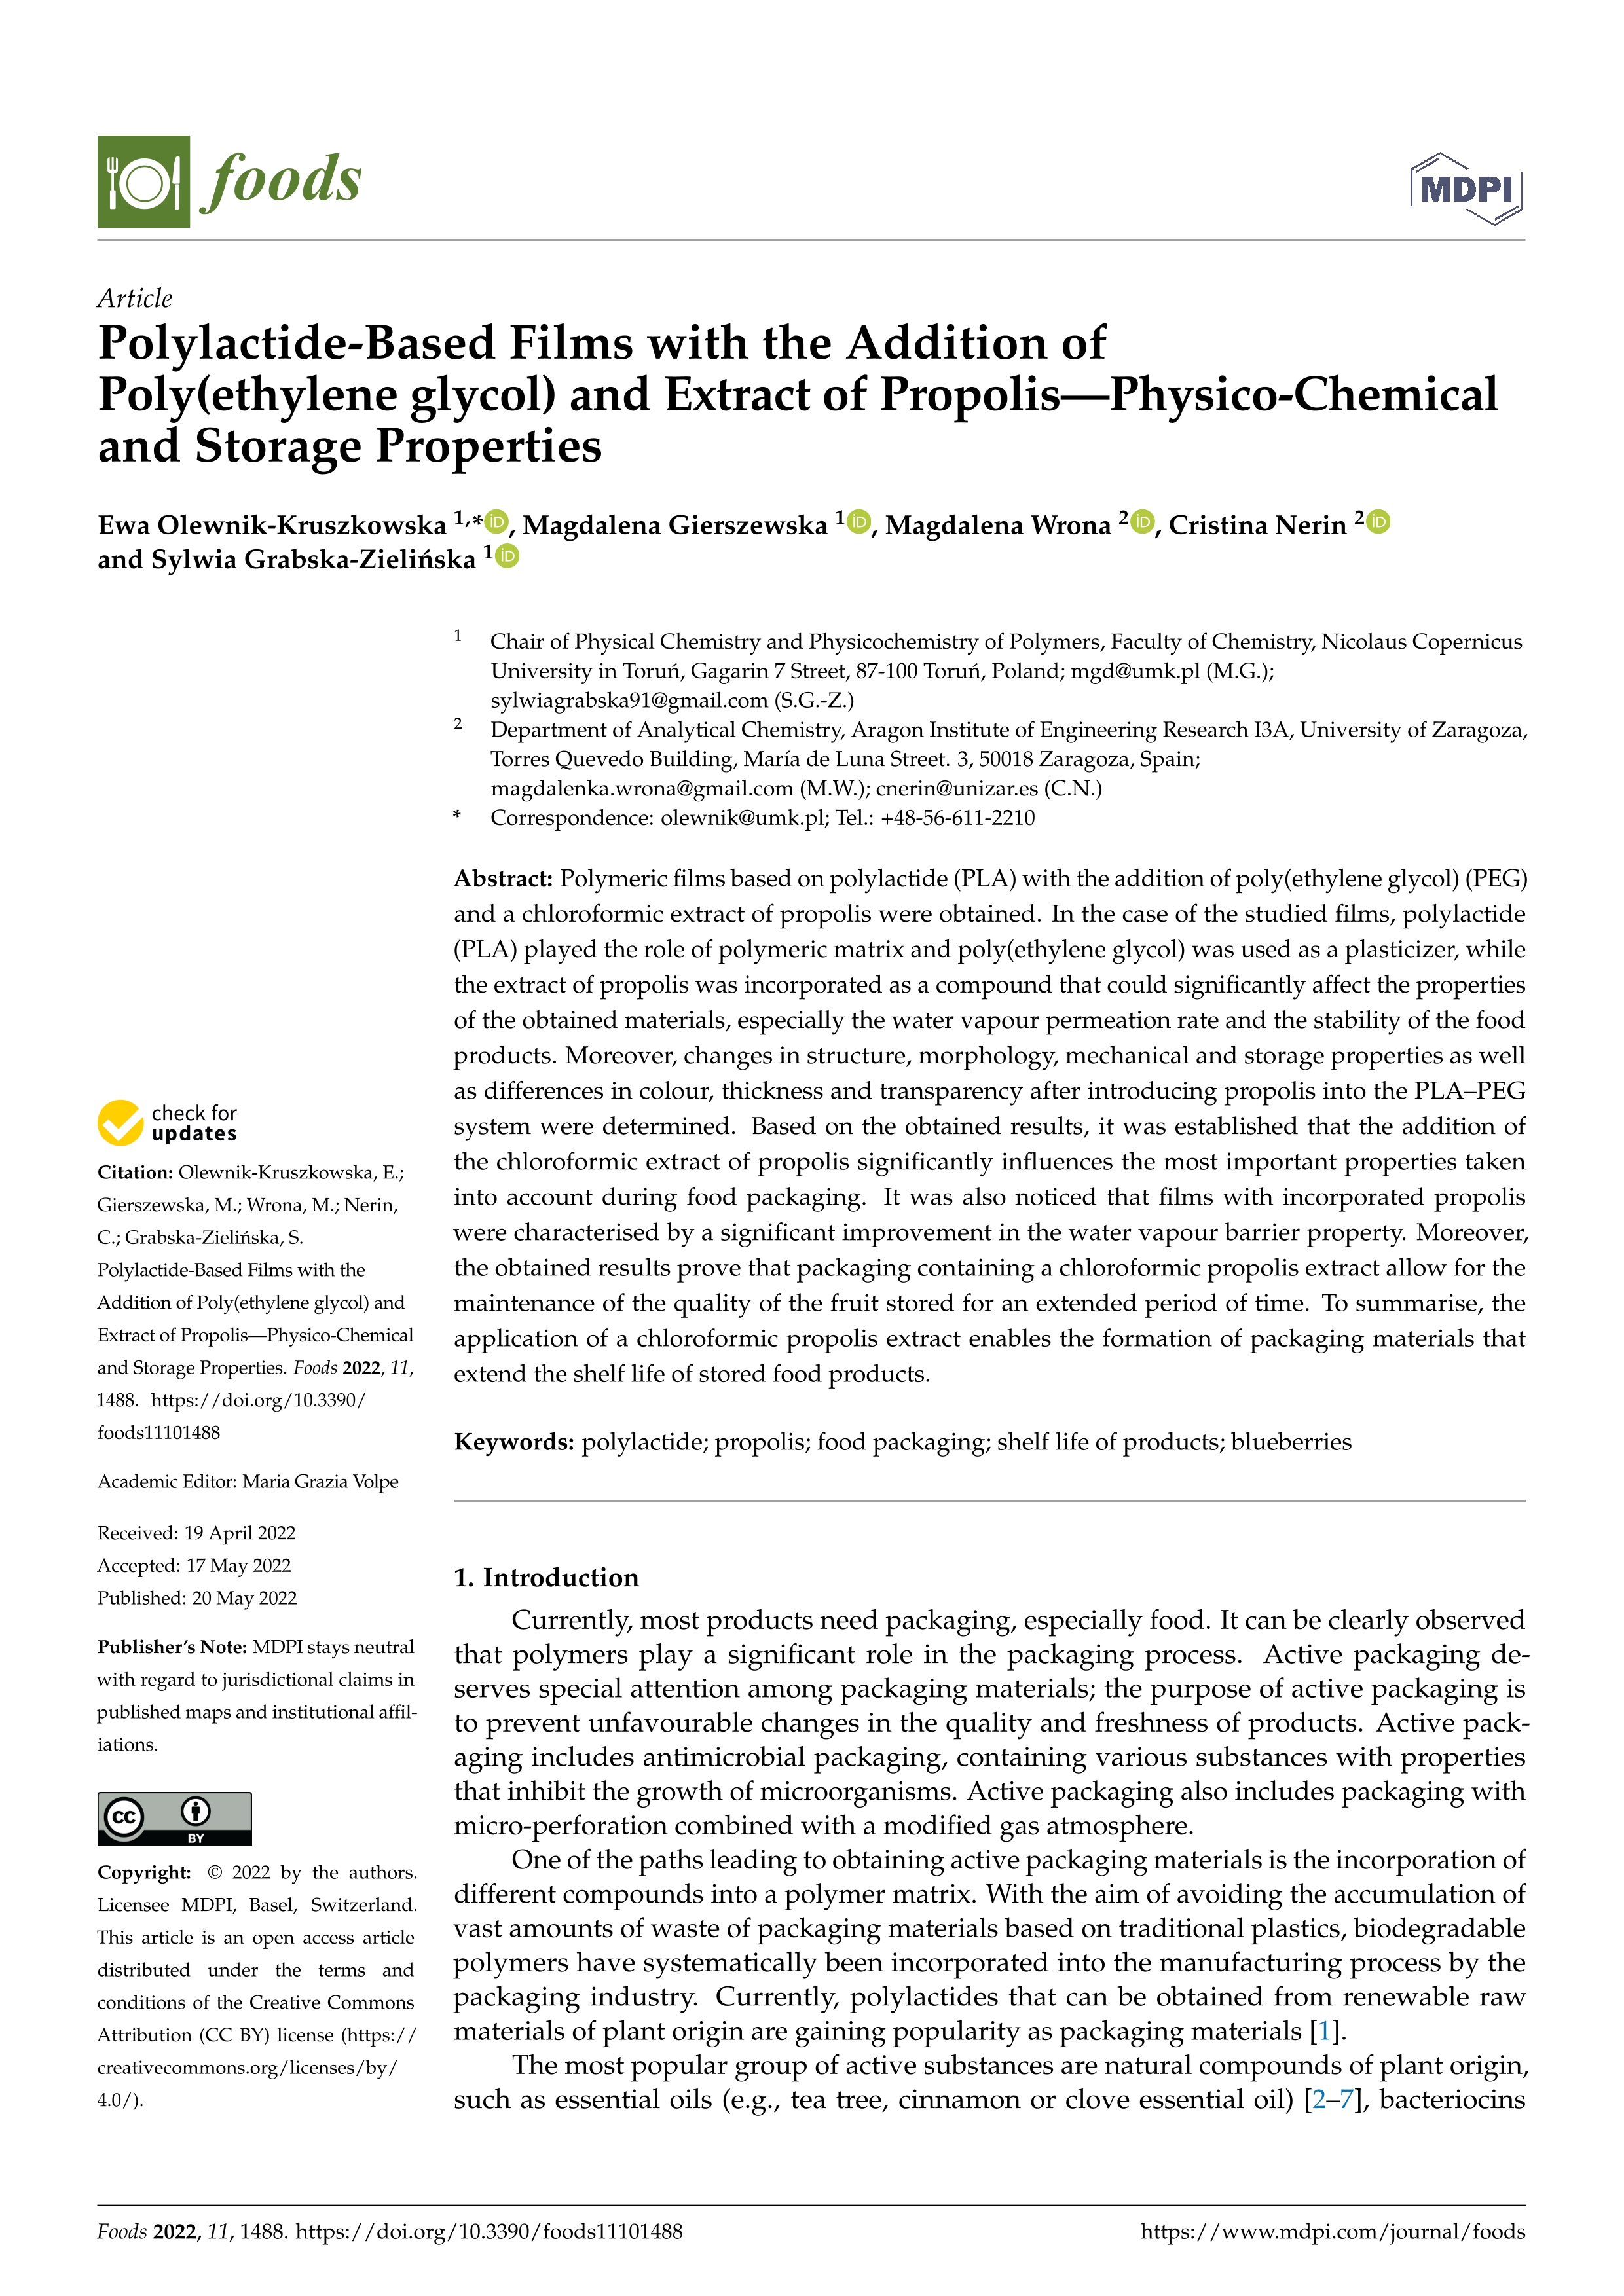 Polylactide-based films with the addition of poly(ethylene glycol) and extract of propolis—physico-chemical and storage properties